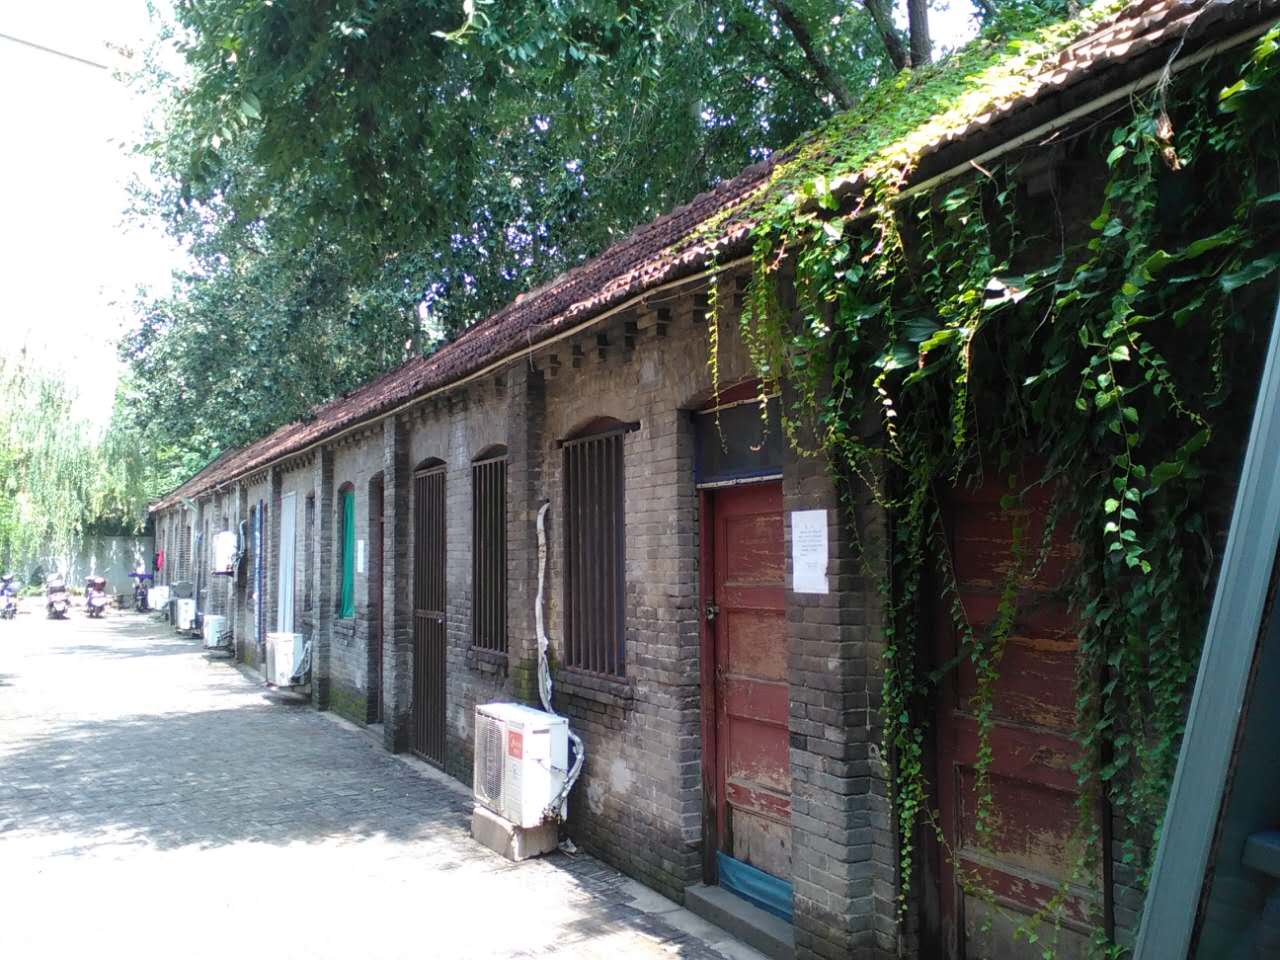 Nowadays appearance of the old house of Ledao Home（Credit: Gospeltimes.cn)